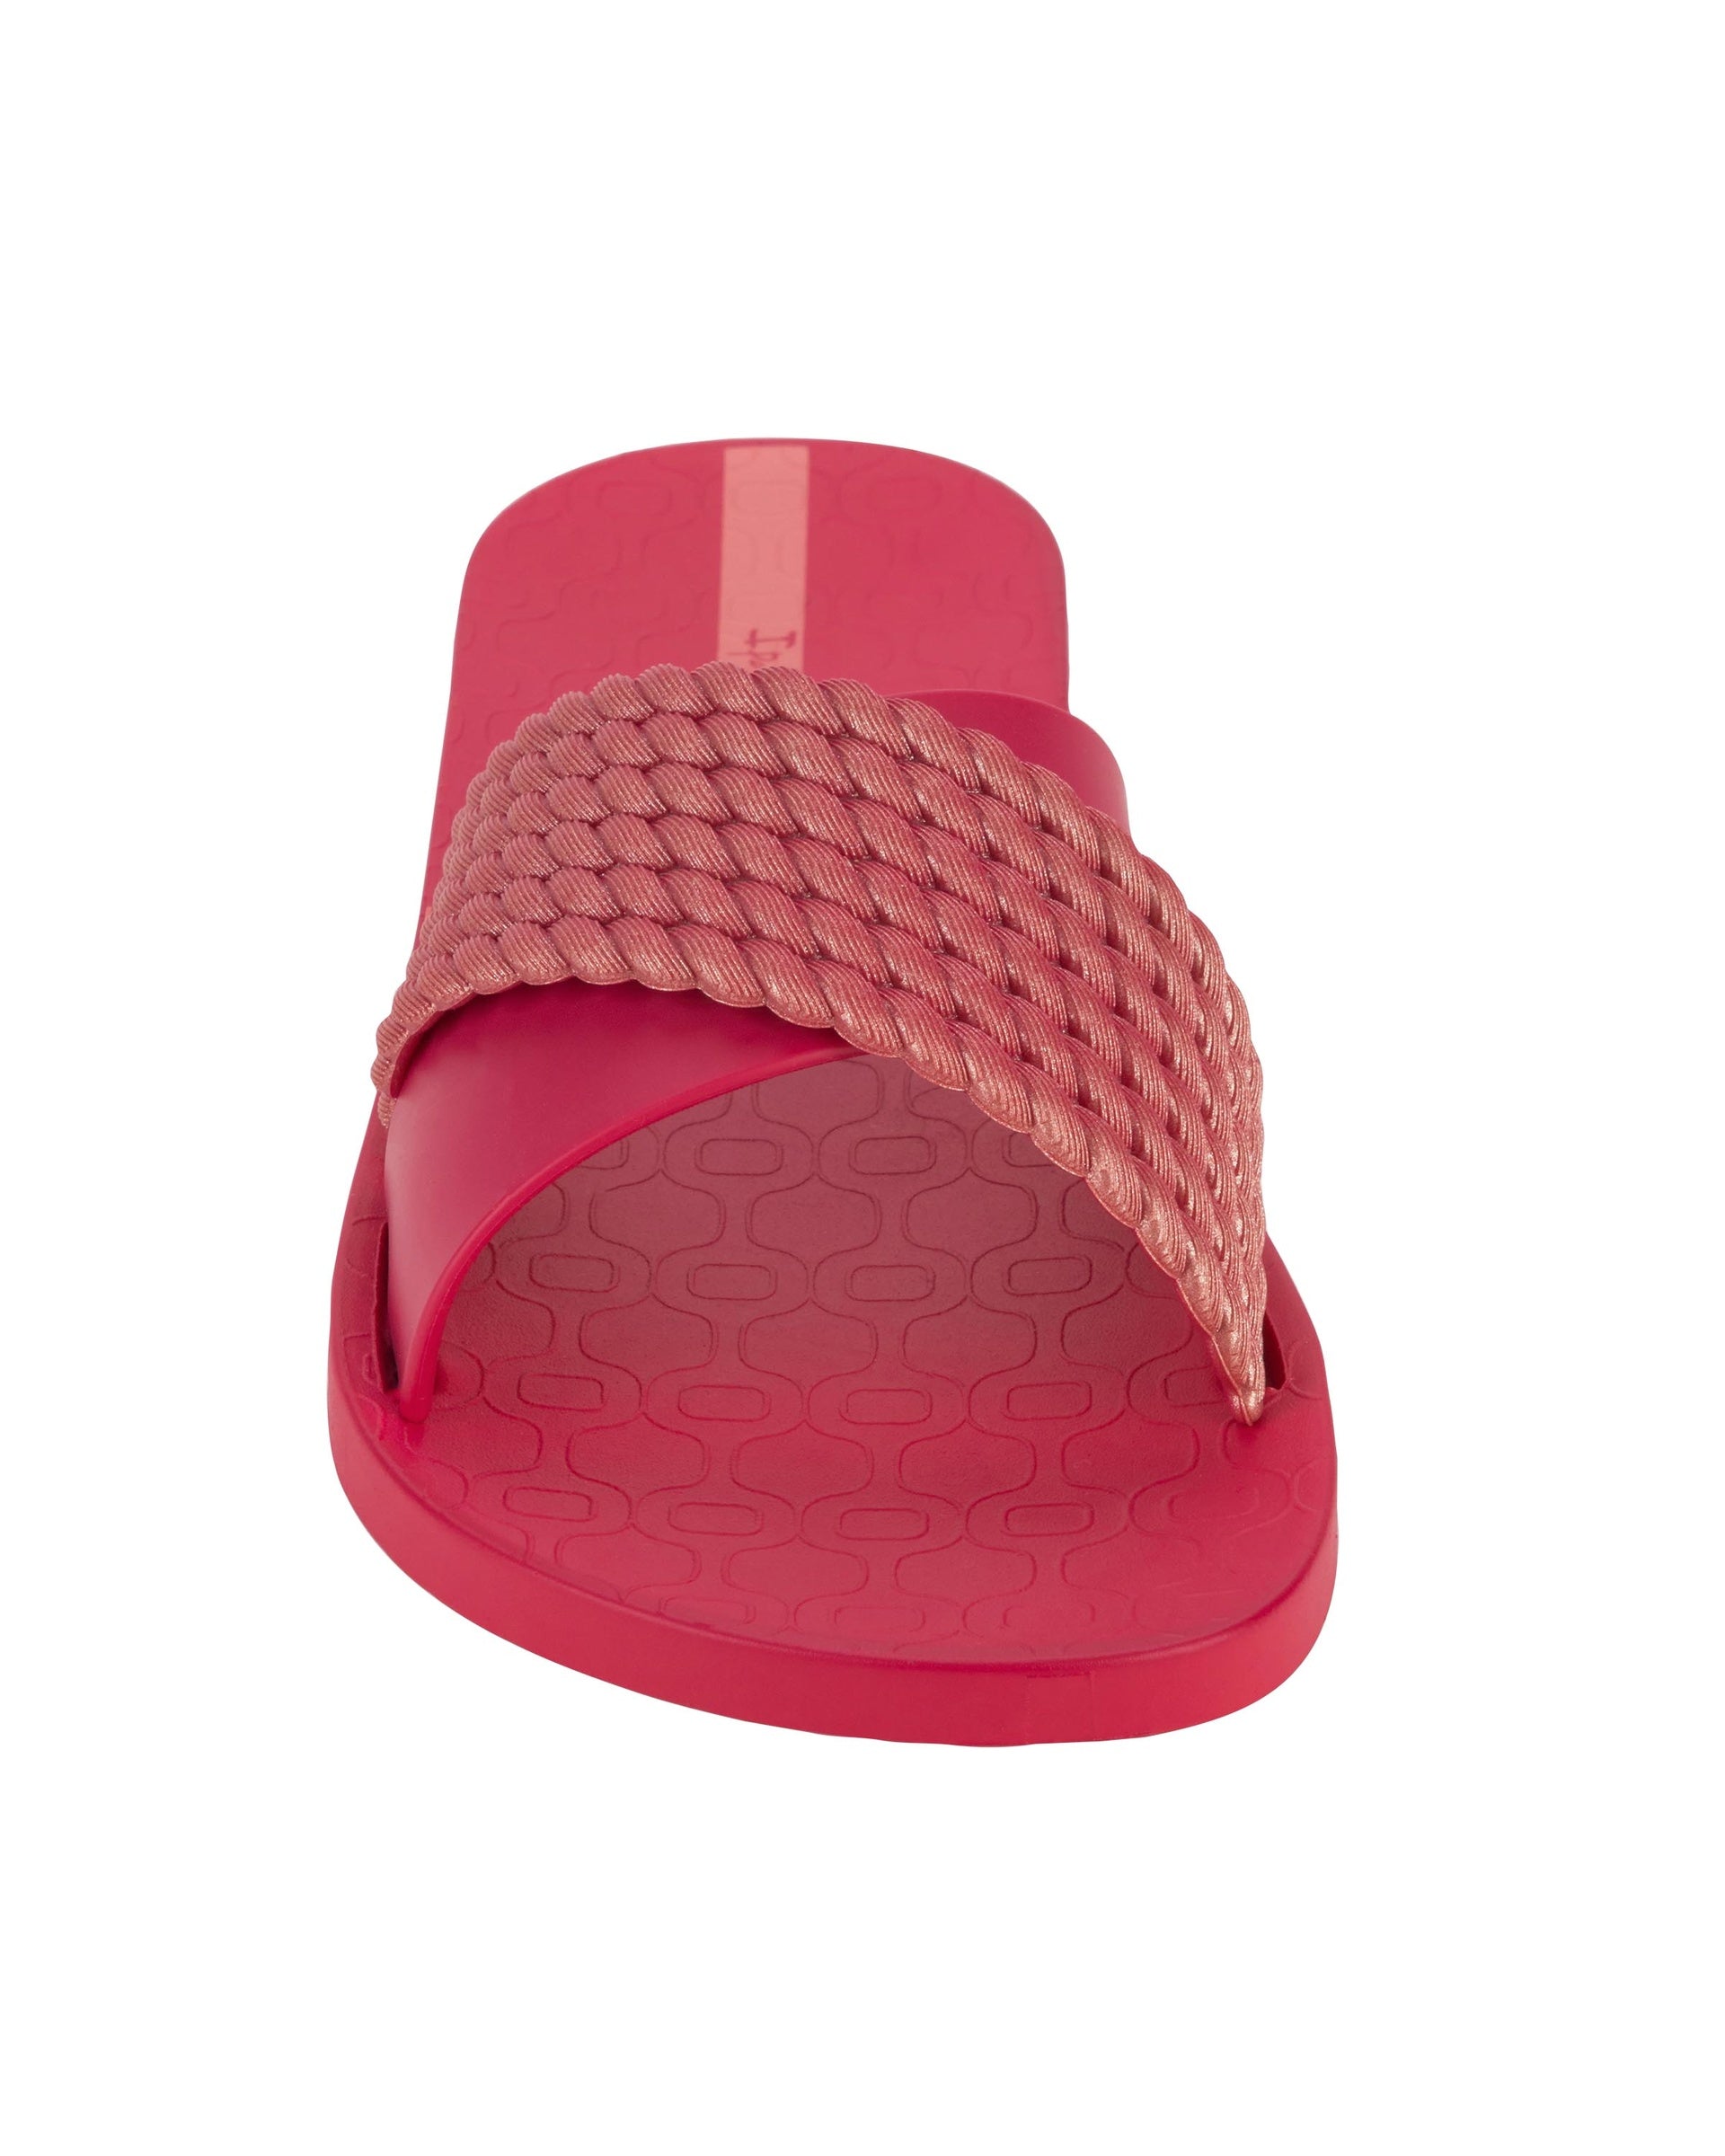 Front view of a red Ipanema Street women's slide.